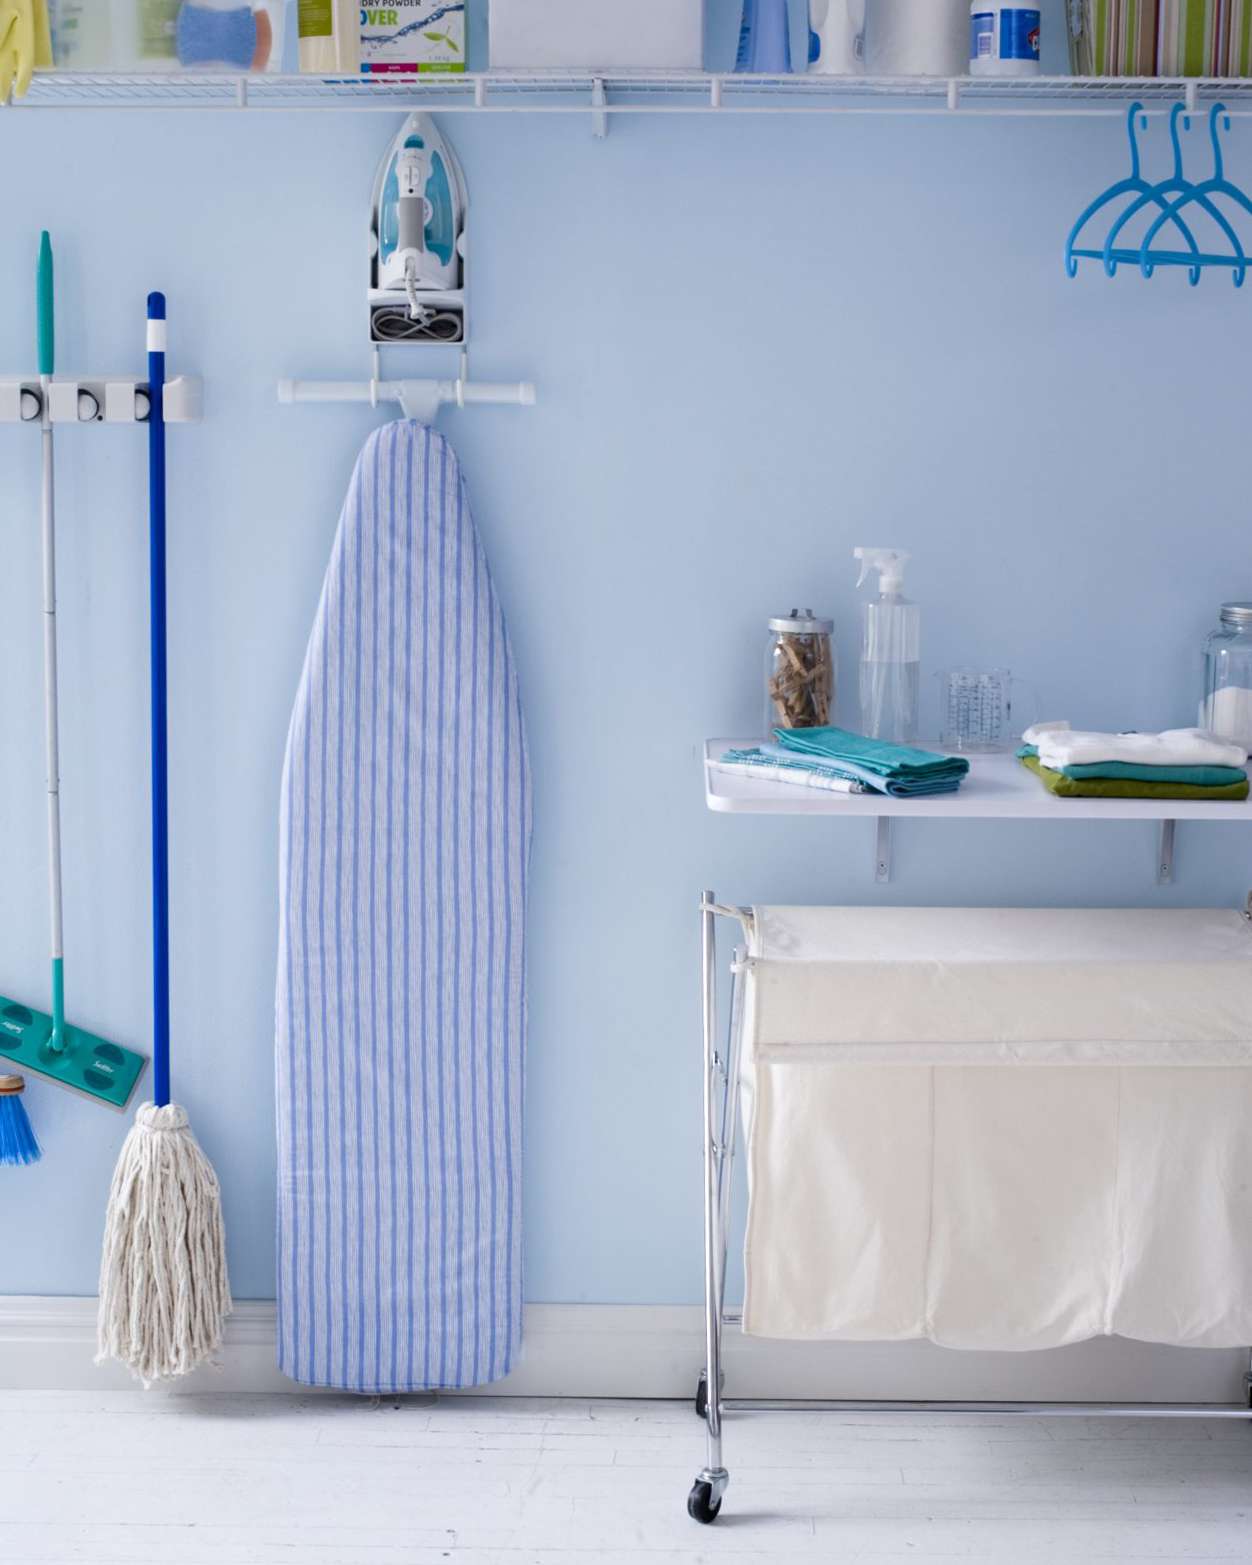 Laundry room with ironing board hanging on wall